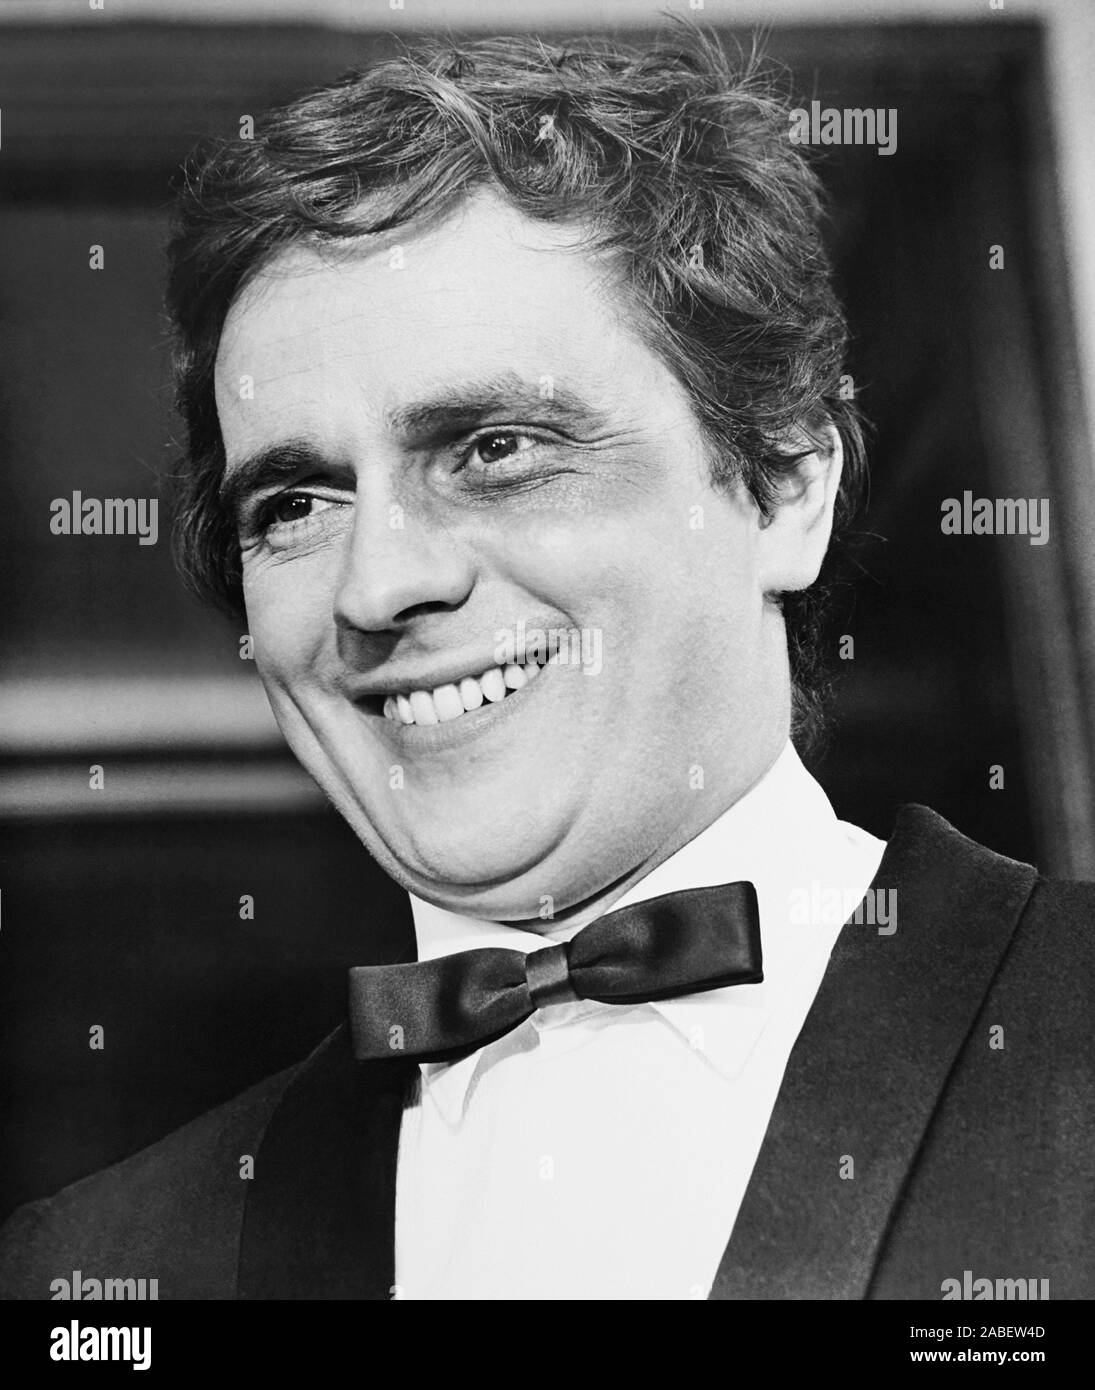 30 IS A DANGEROUS AGE, CYNTHIA, Dudley Moore, 1968 Stock Photo - Alamy